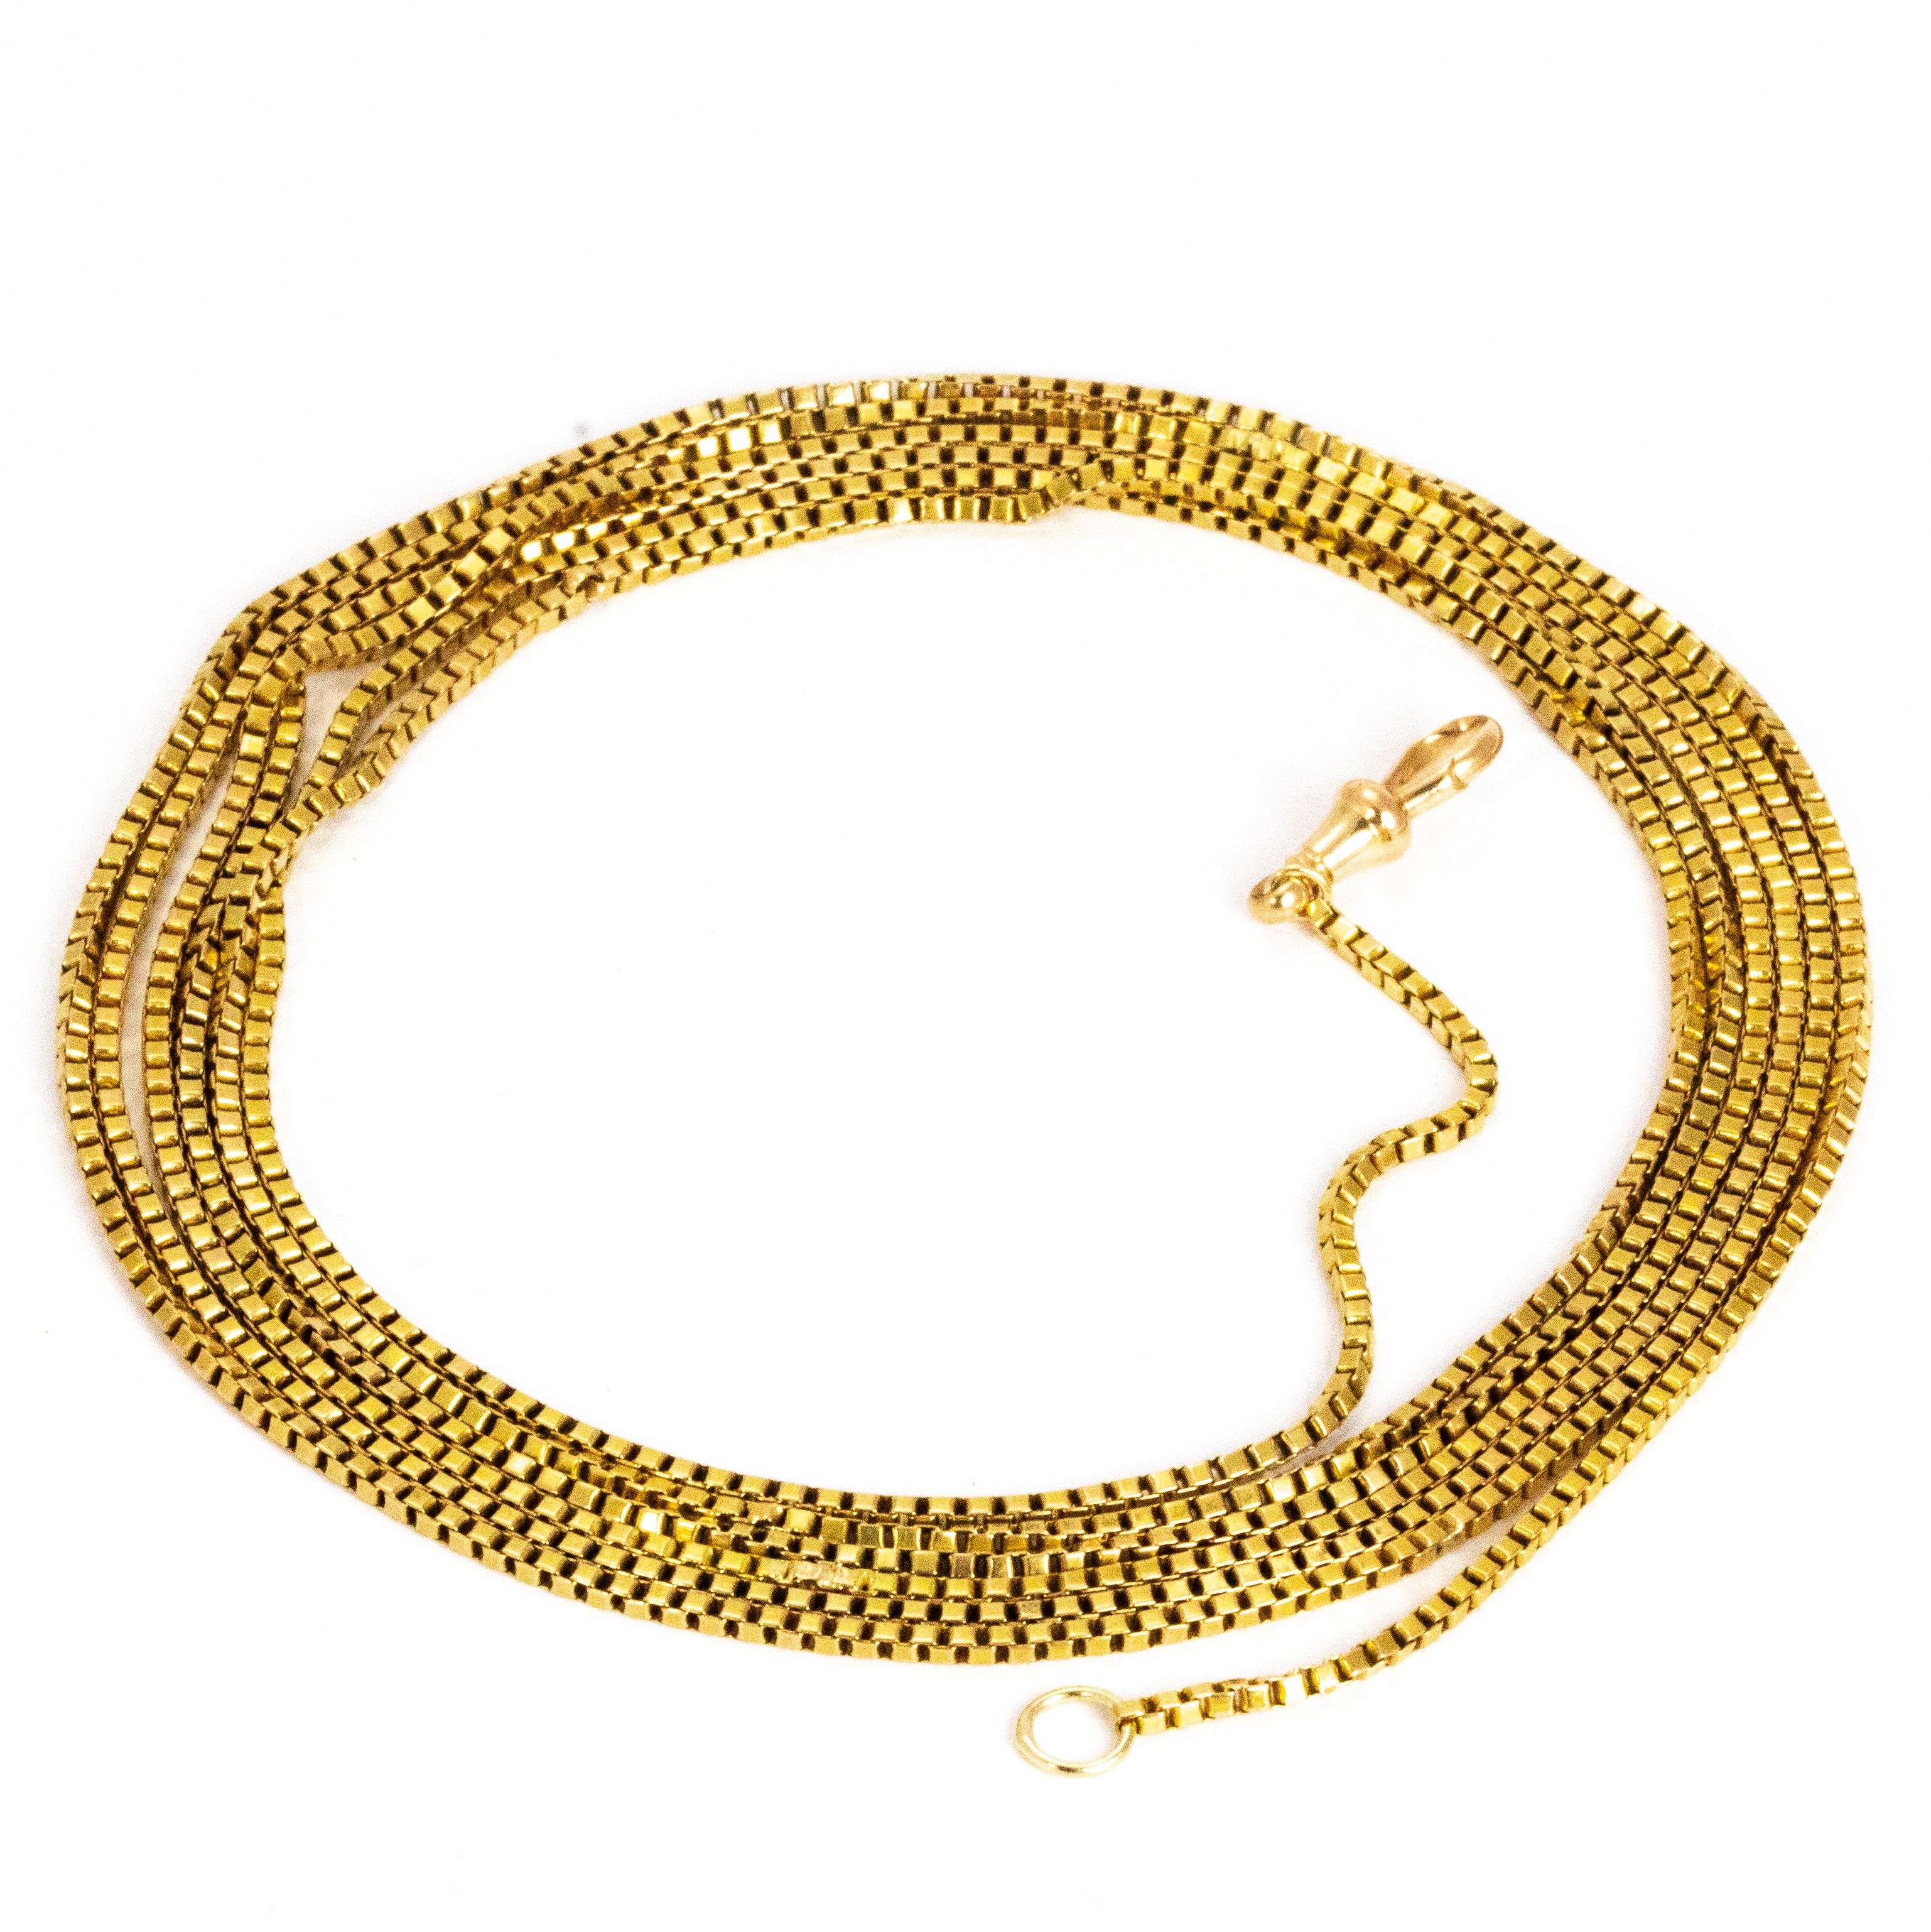 The box link chain on this longuard chain glistens in the light and has such a delicate appearance. This chain is very long and would work well as a long chain or wrapped a number of times to create layers. The necklace is fastened with a dog